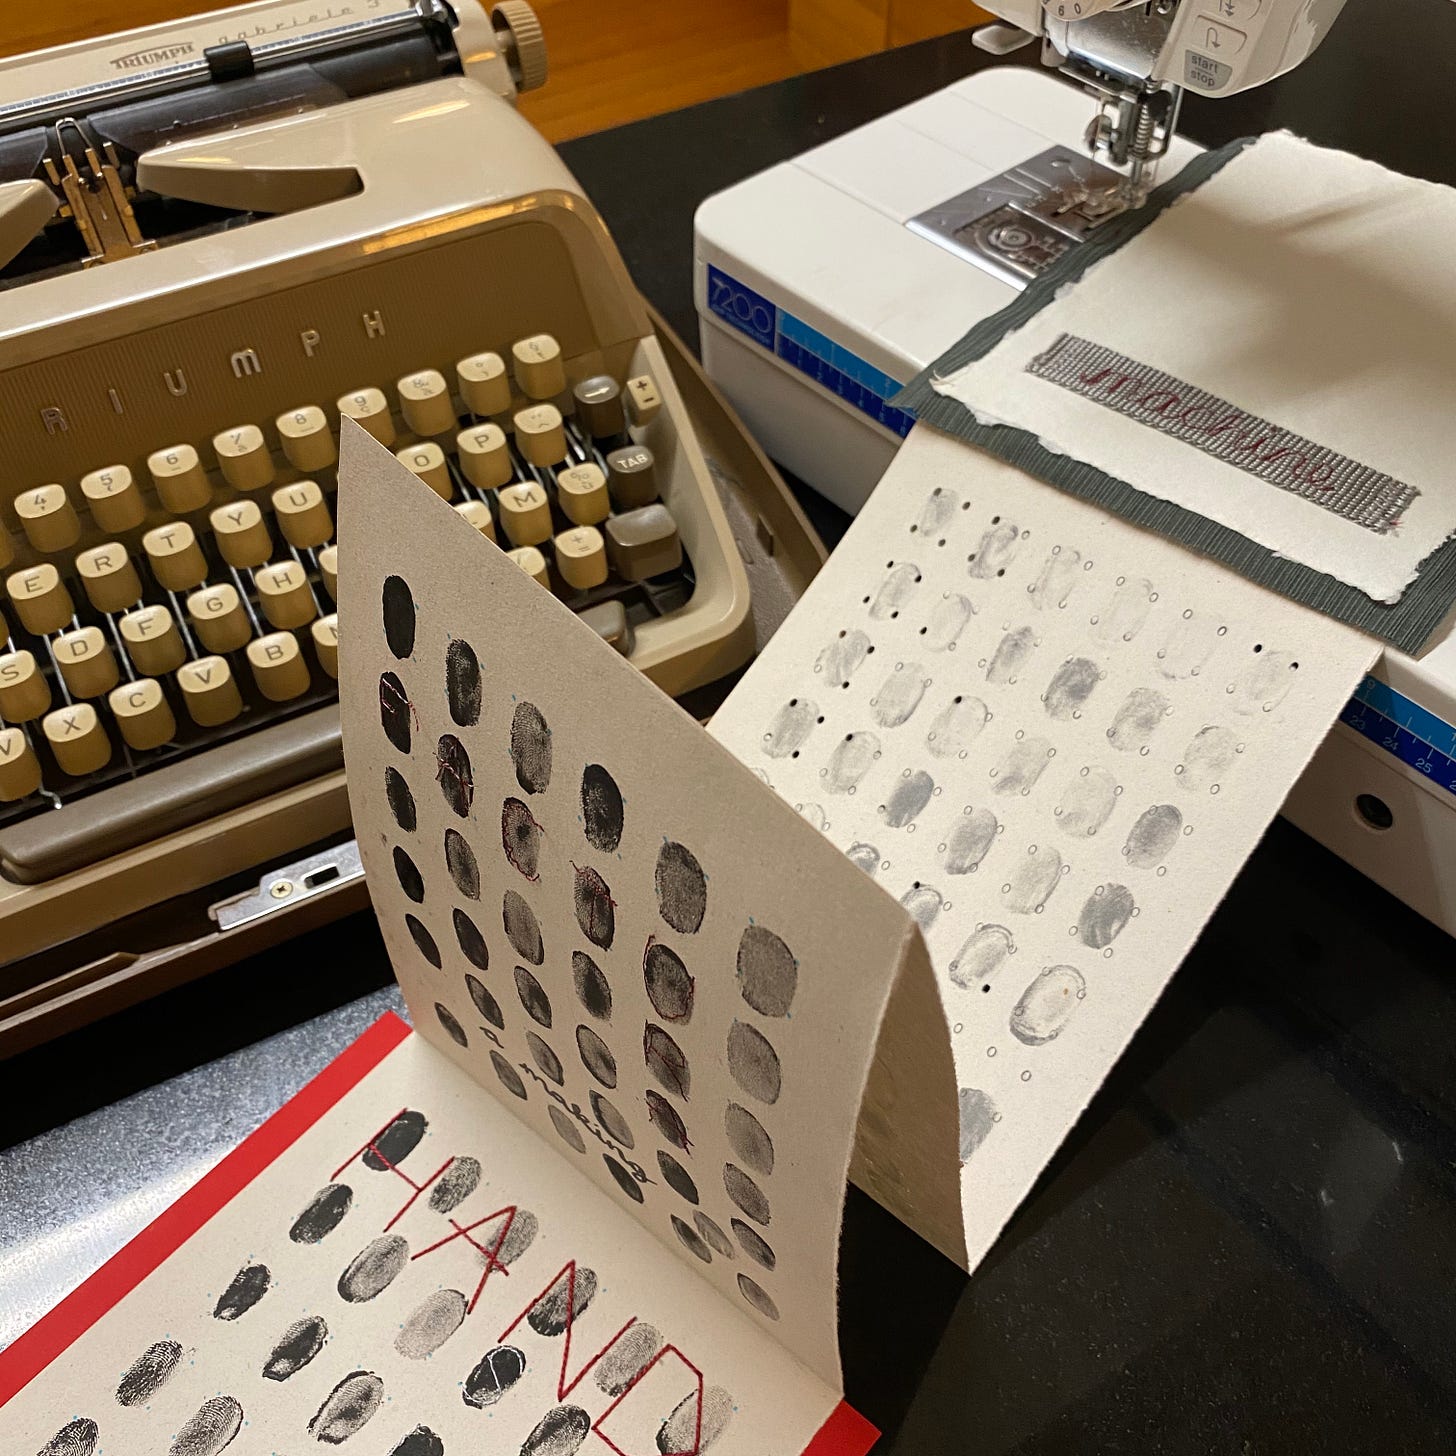 a handmade concertina book titled machine with thumbprints and other regular patterns on the pages created by typewritten letters repeated and stitched on a sewing machine - both the typewriter and the sewing machine are in the image.